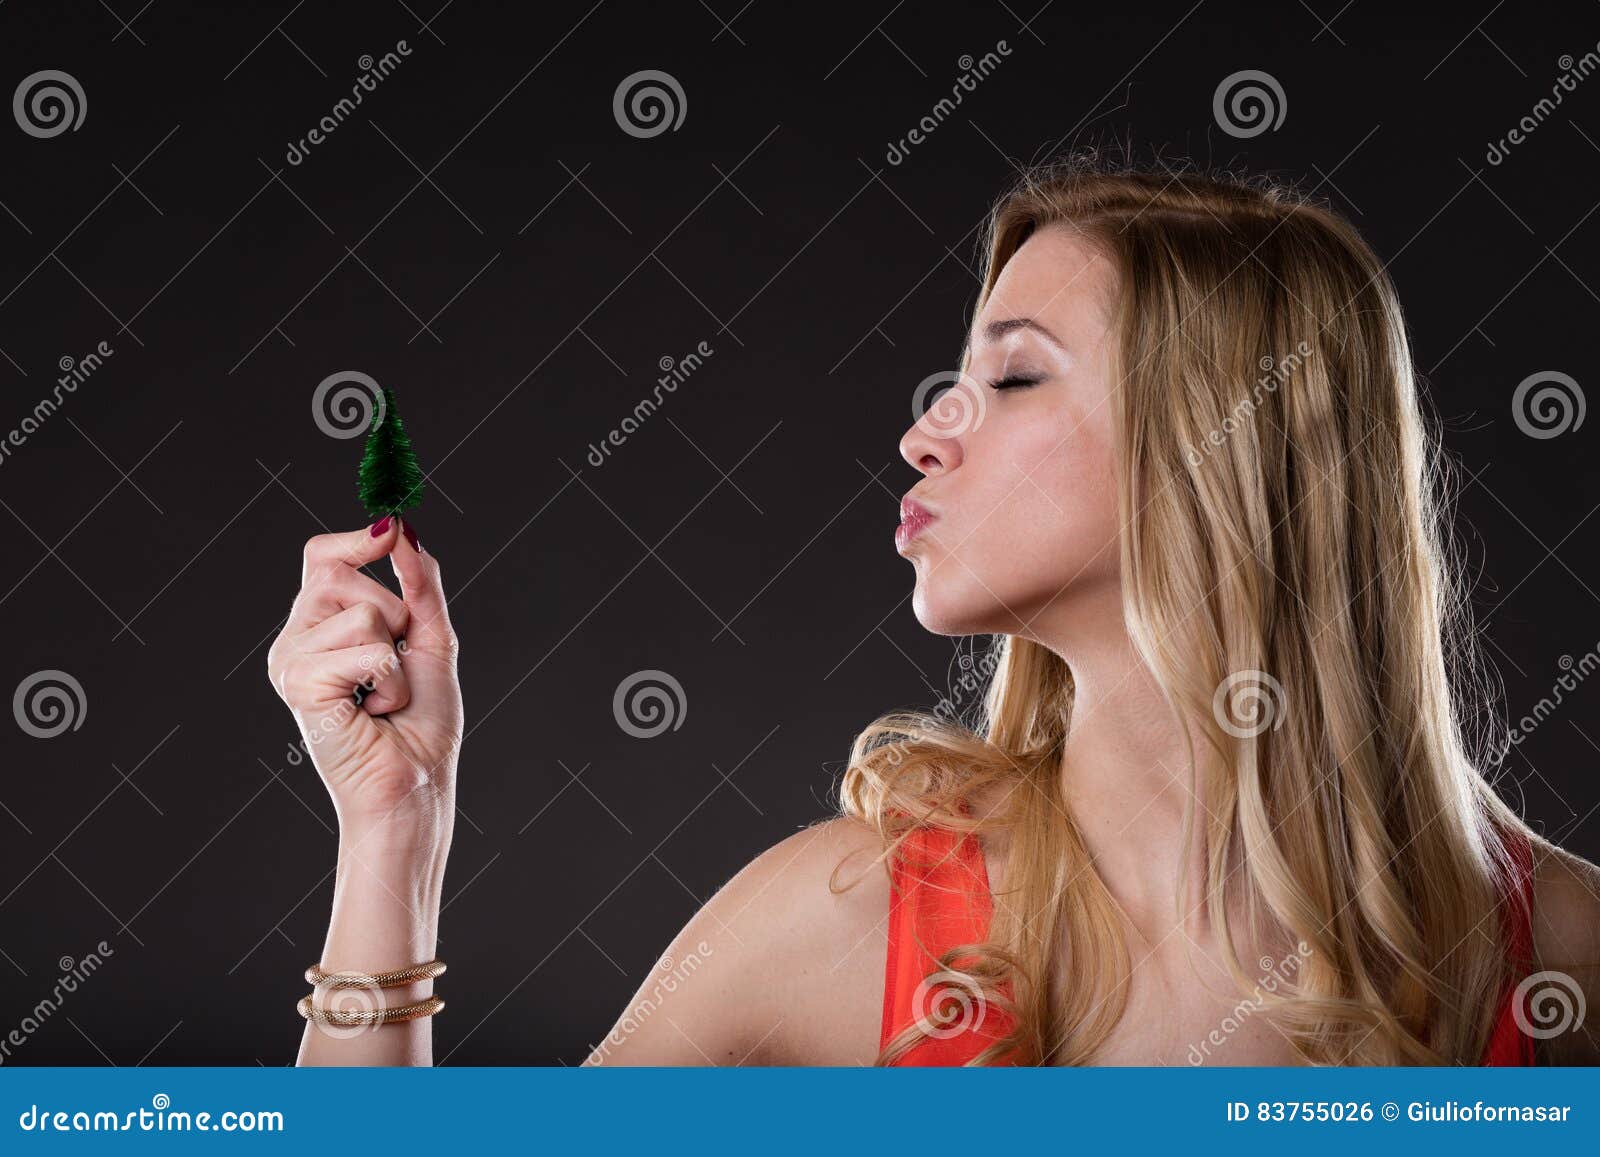 Woman Sending Kisses To a Little Tree Stock Photo - Image of hair ...